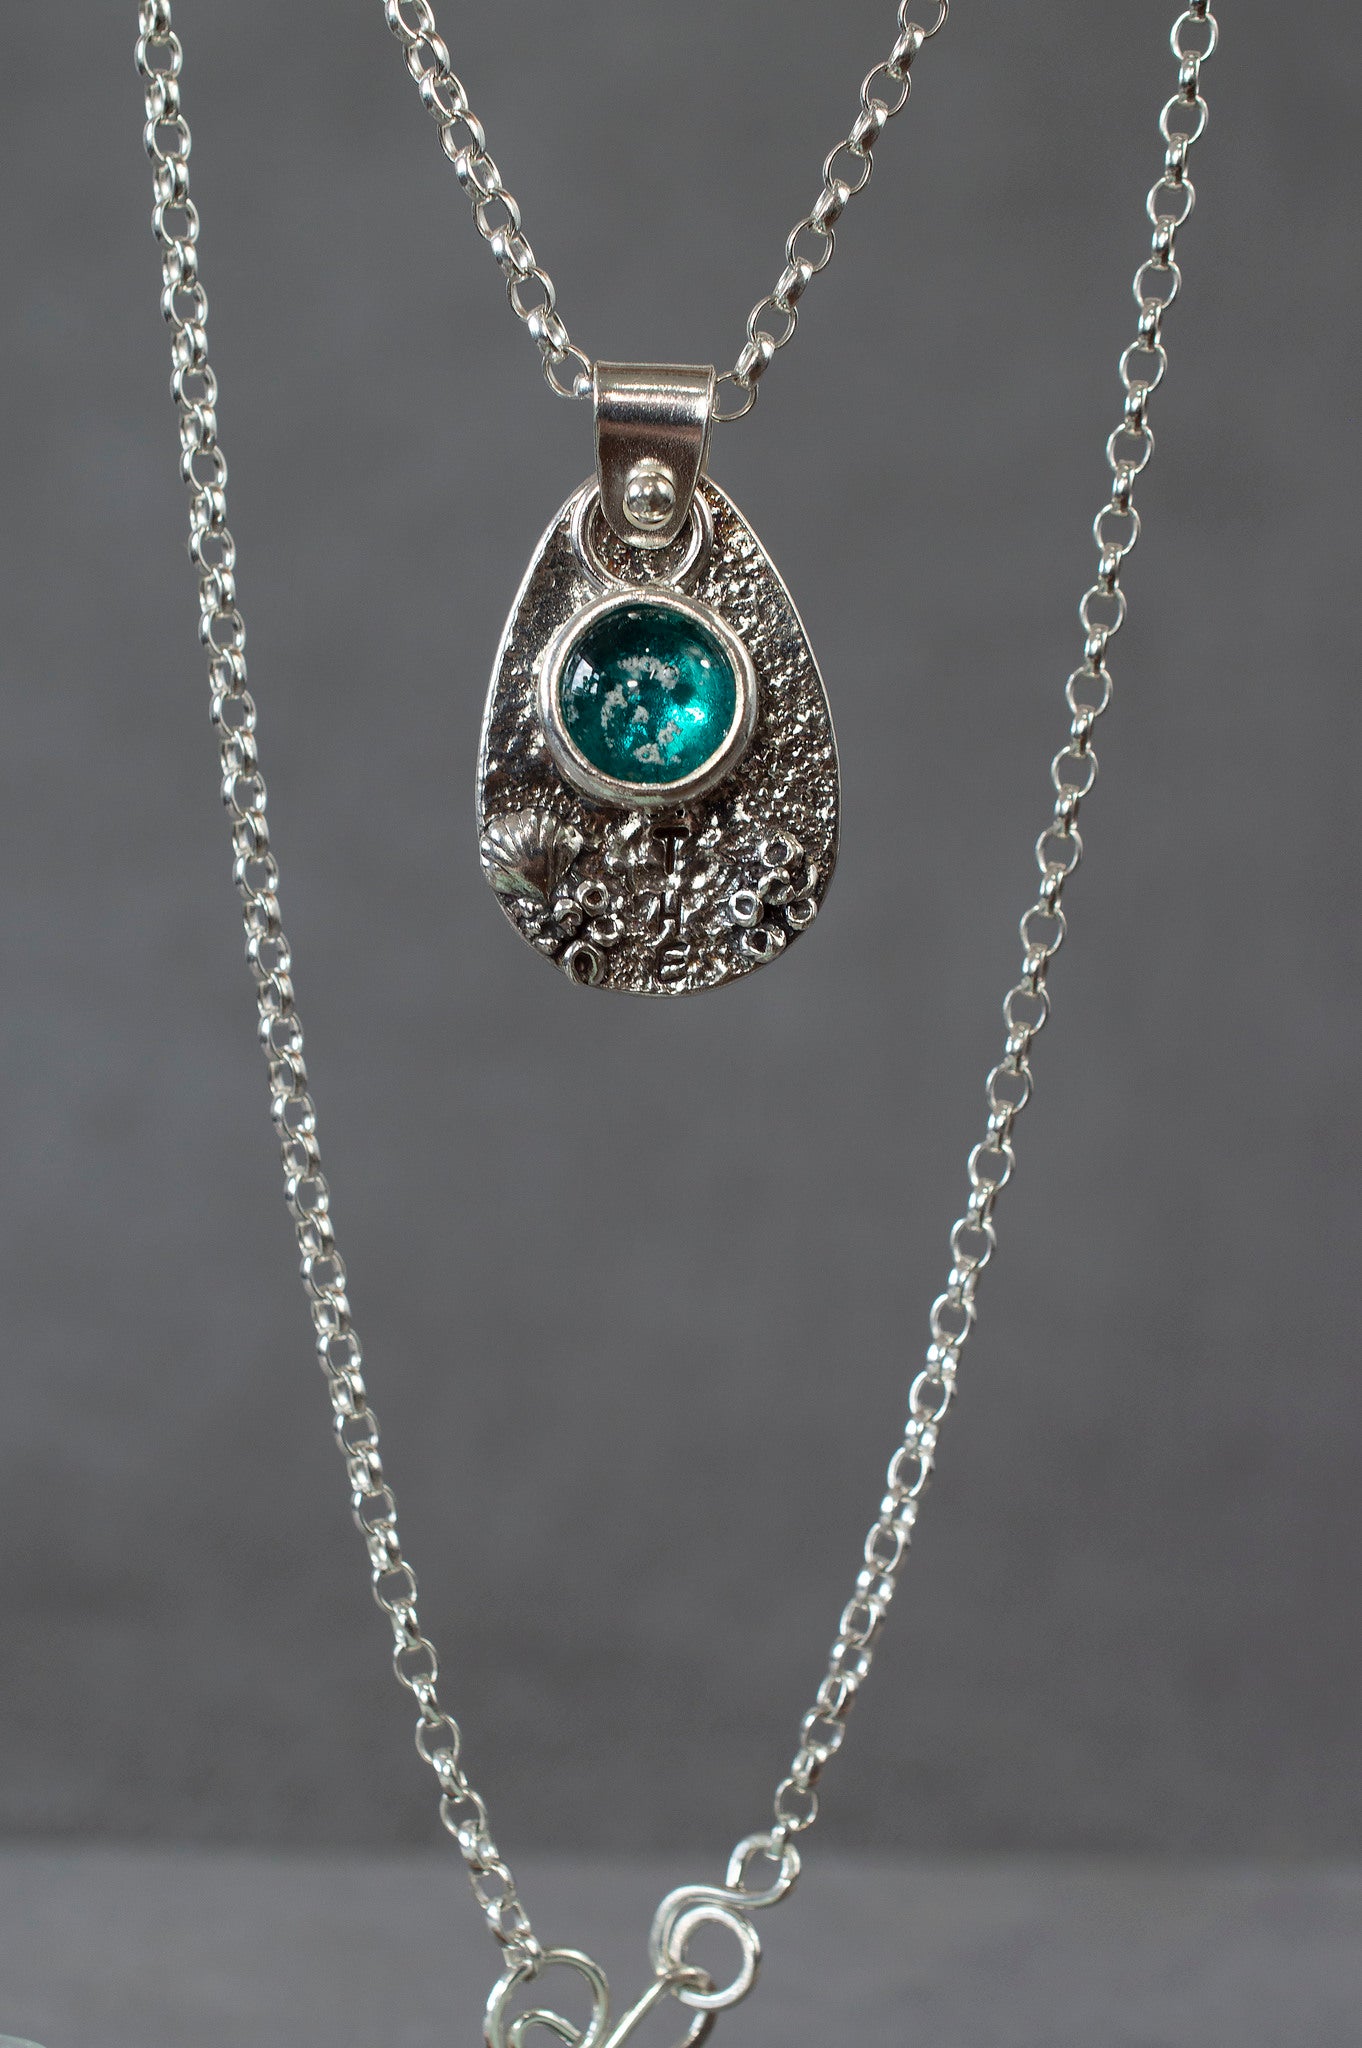 ashes in glass silver necklace